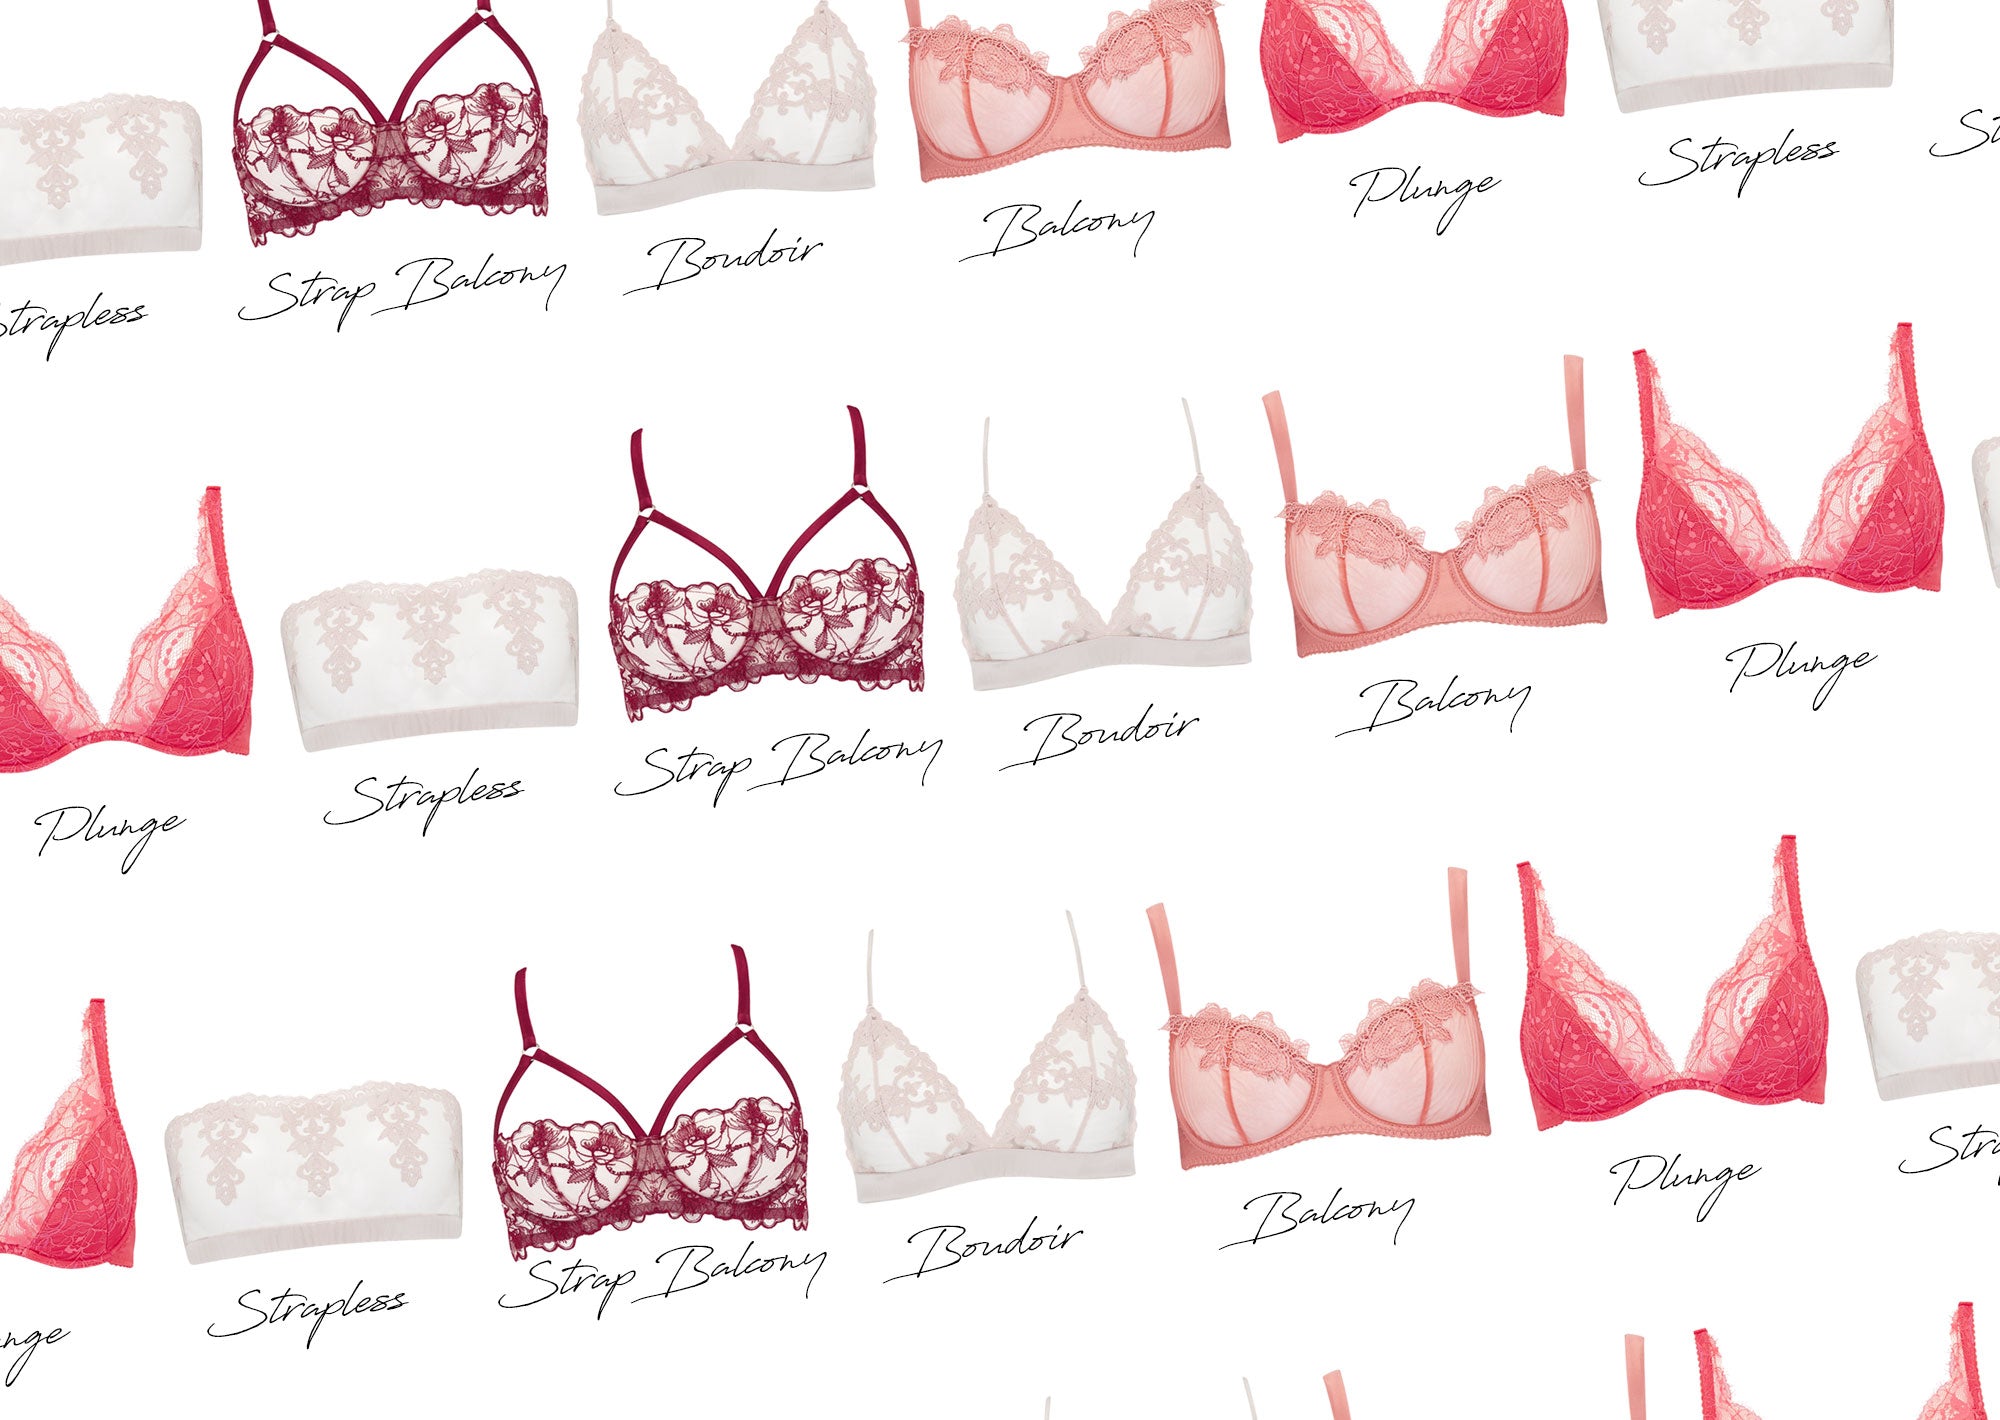 The International Bra Size Chart, Explained The Lingerie, 45% OFF